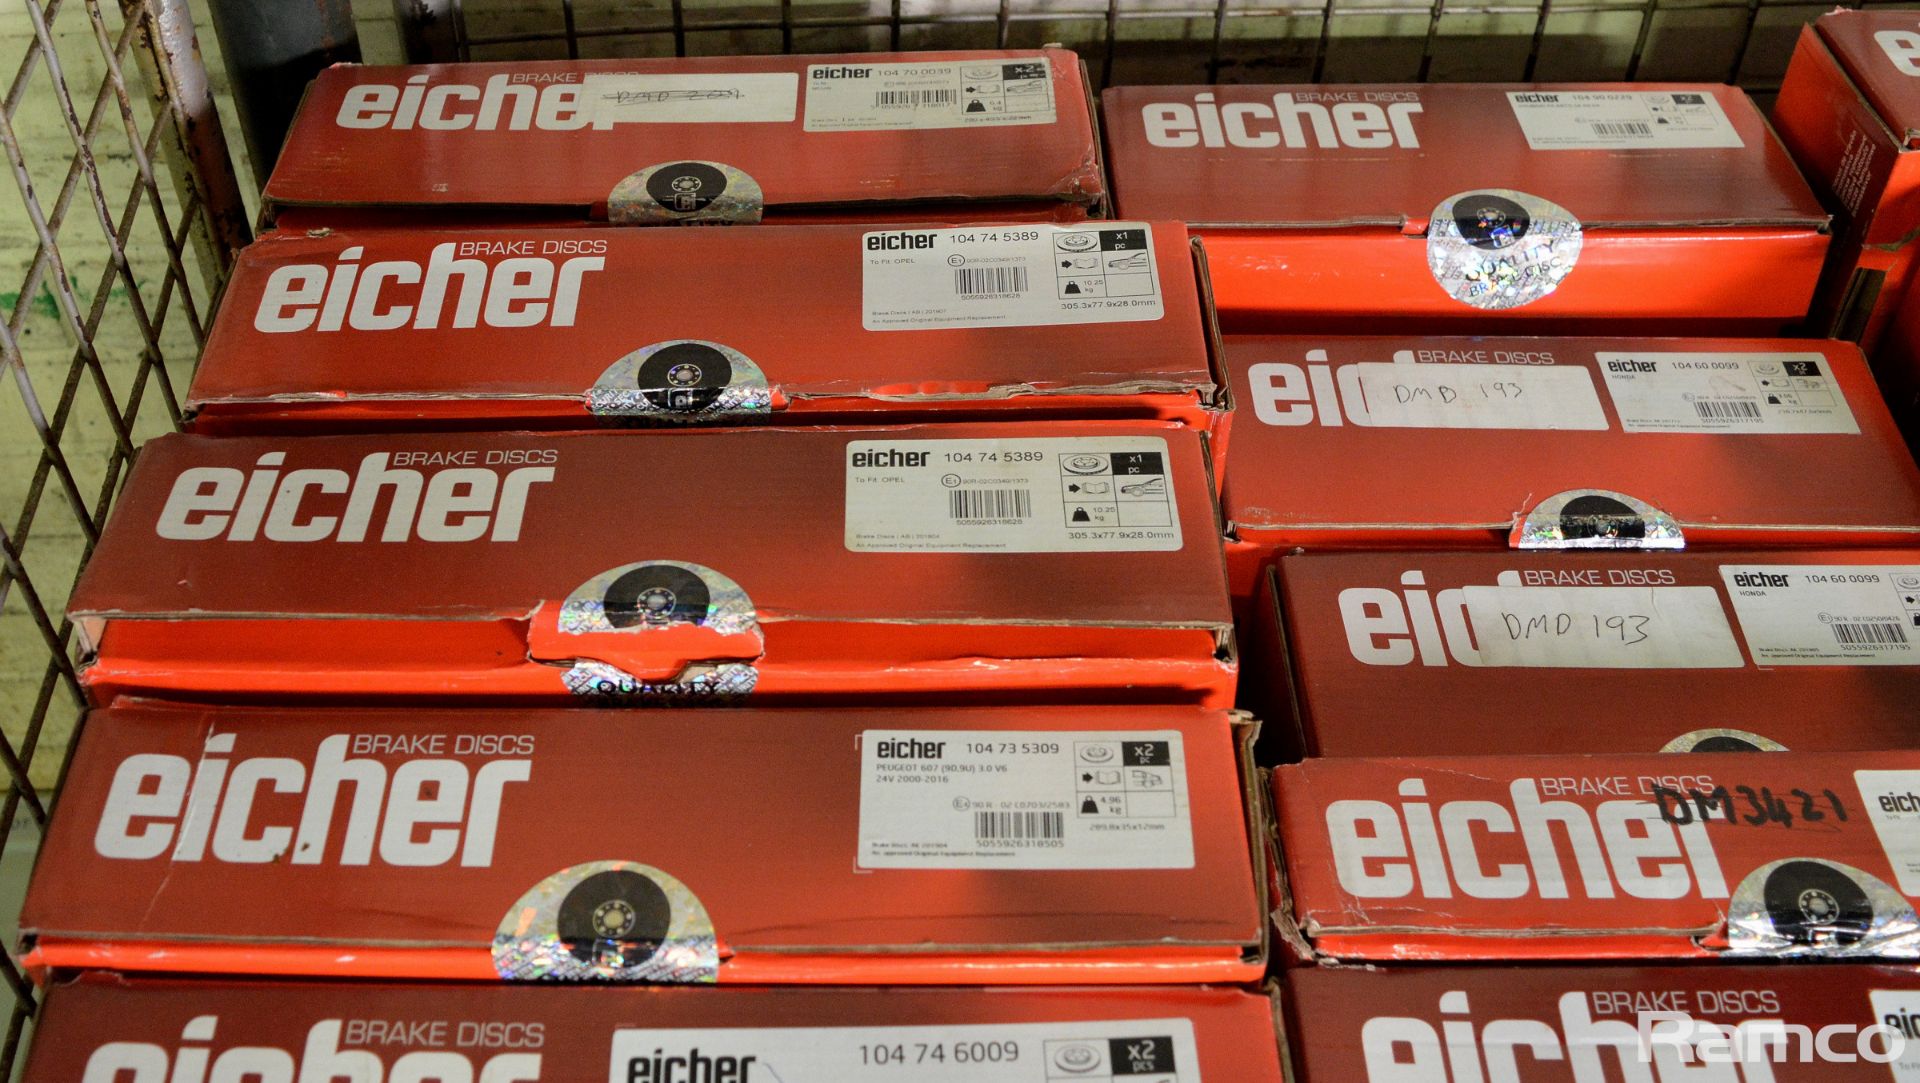 Eicher brake discs - see pictures for model / type - Image 3 of 7